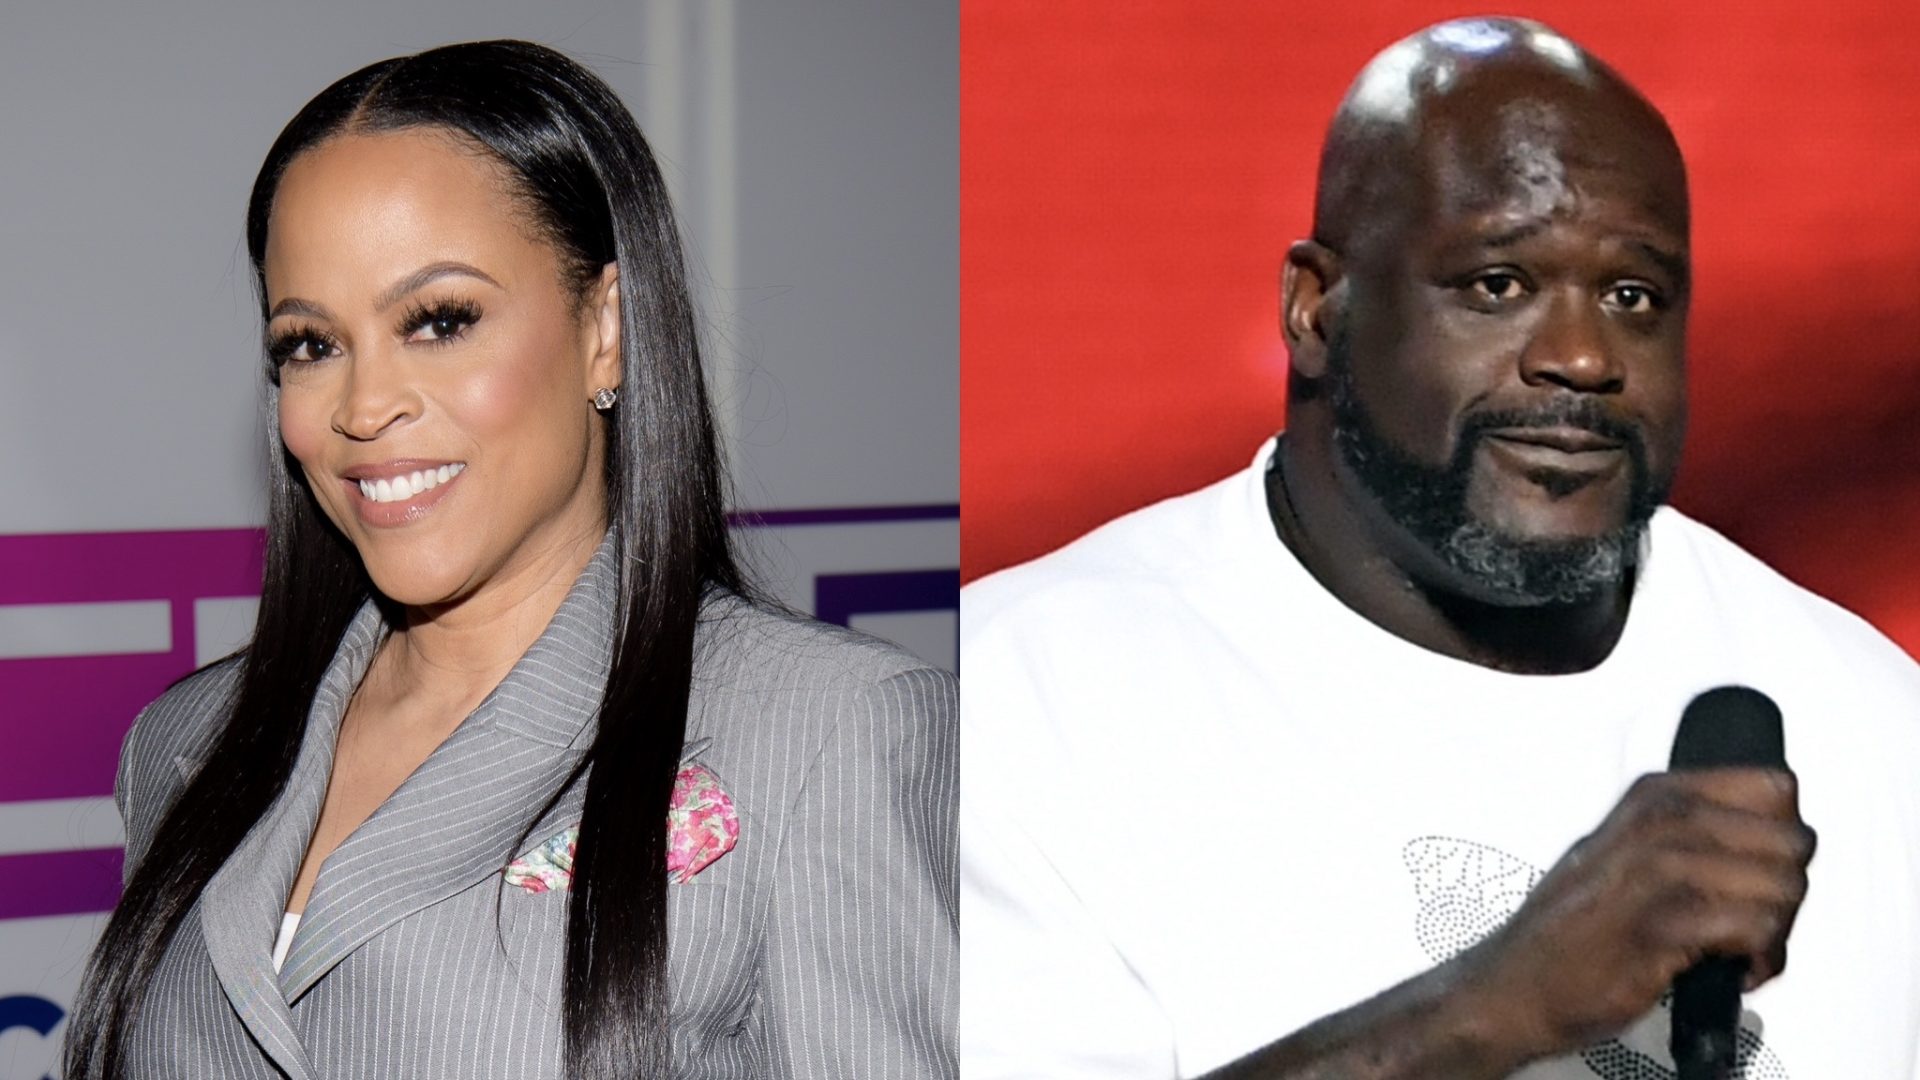 Shaunie Henderson Speaks Out After Going Viral For Saying She Doesn’t Know If She Was “Ever Really In Love” With Shaq